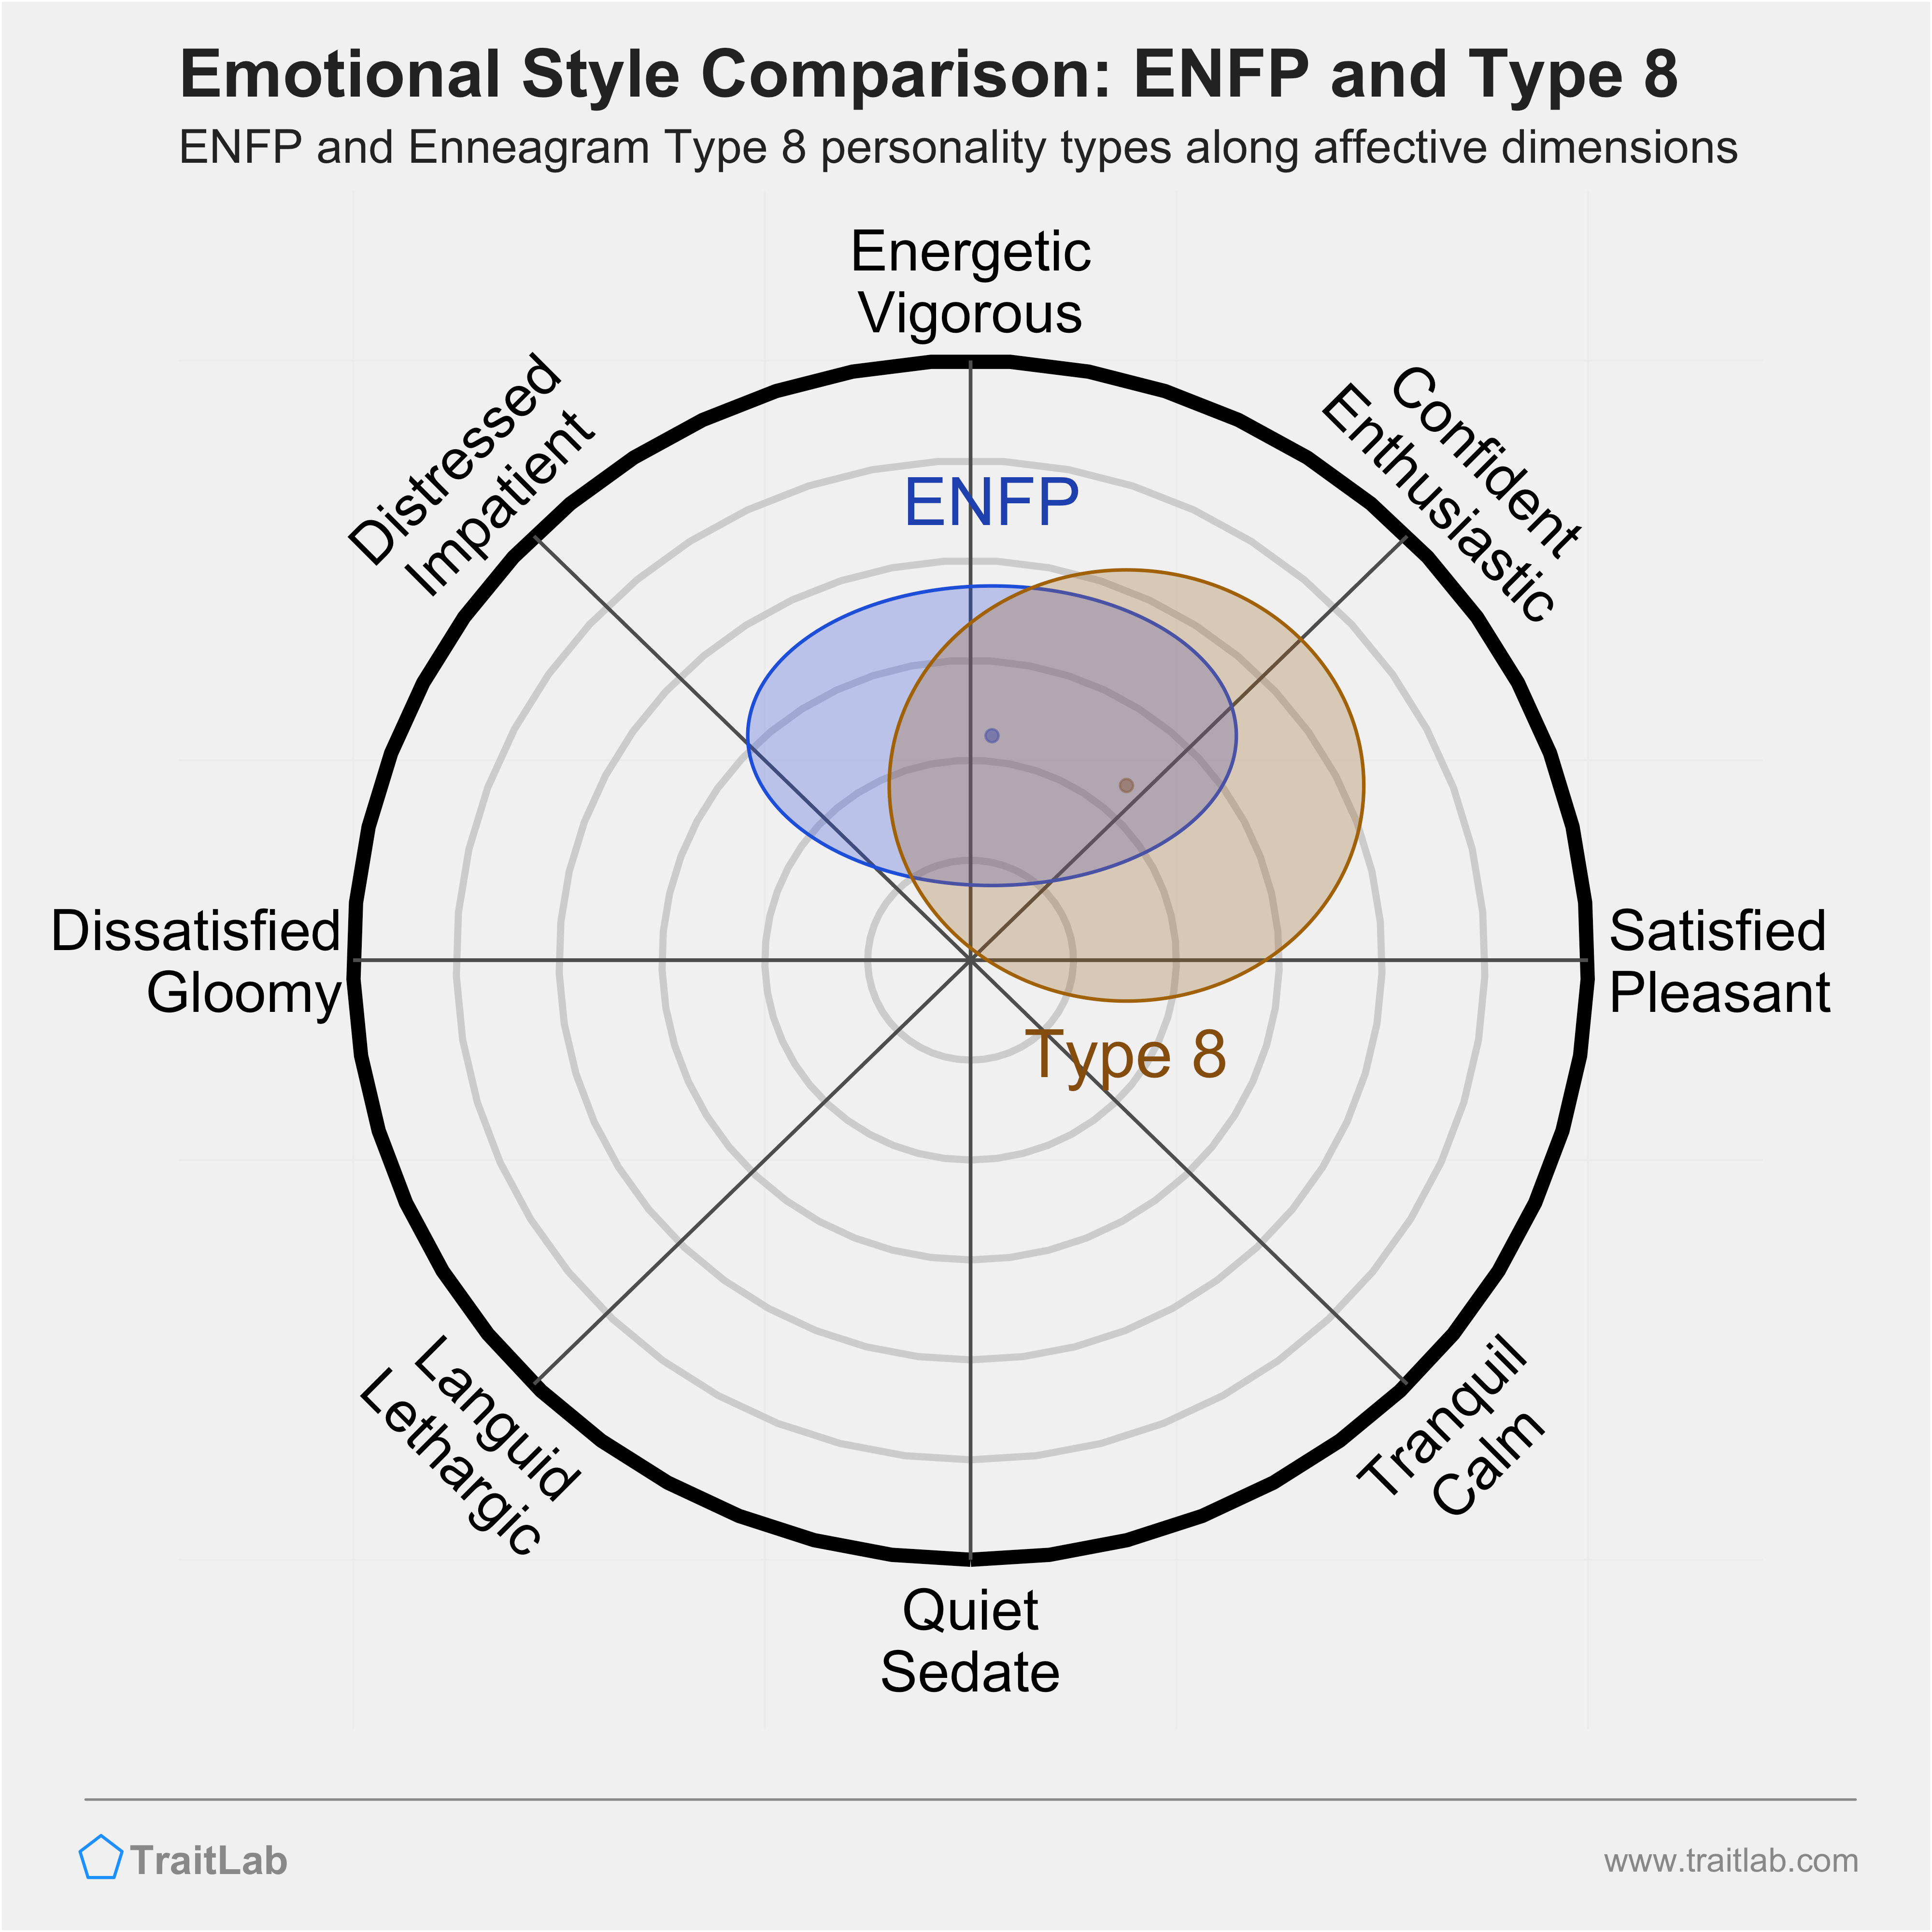 ENFP and Type 8 comparison across emotional (affective) dimensions